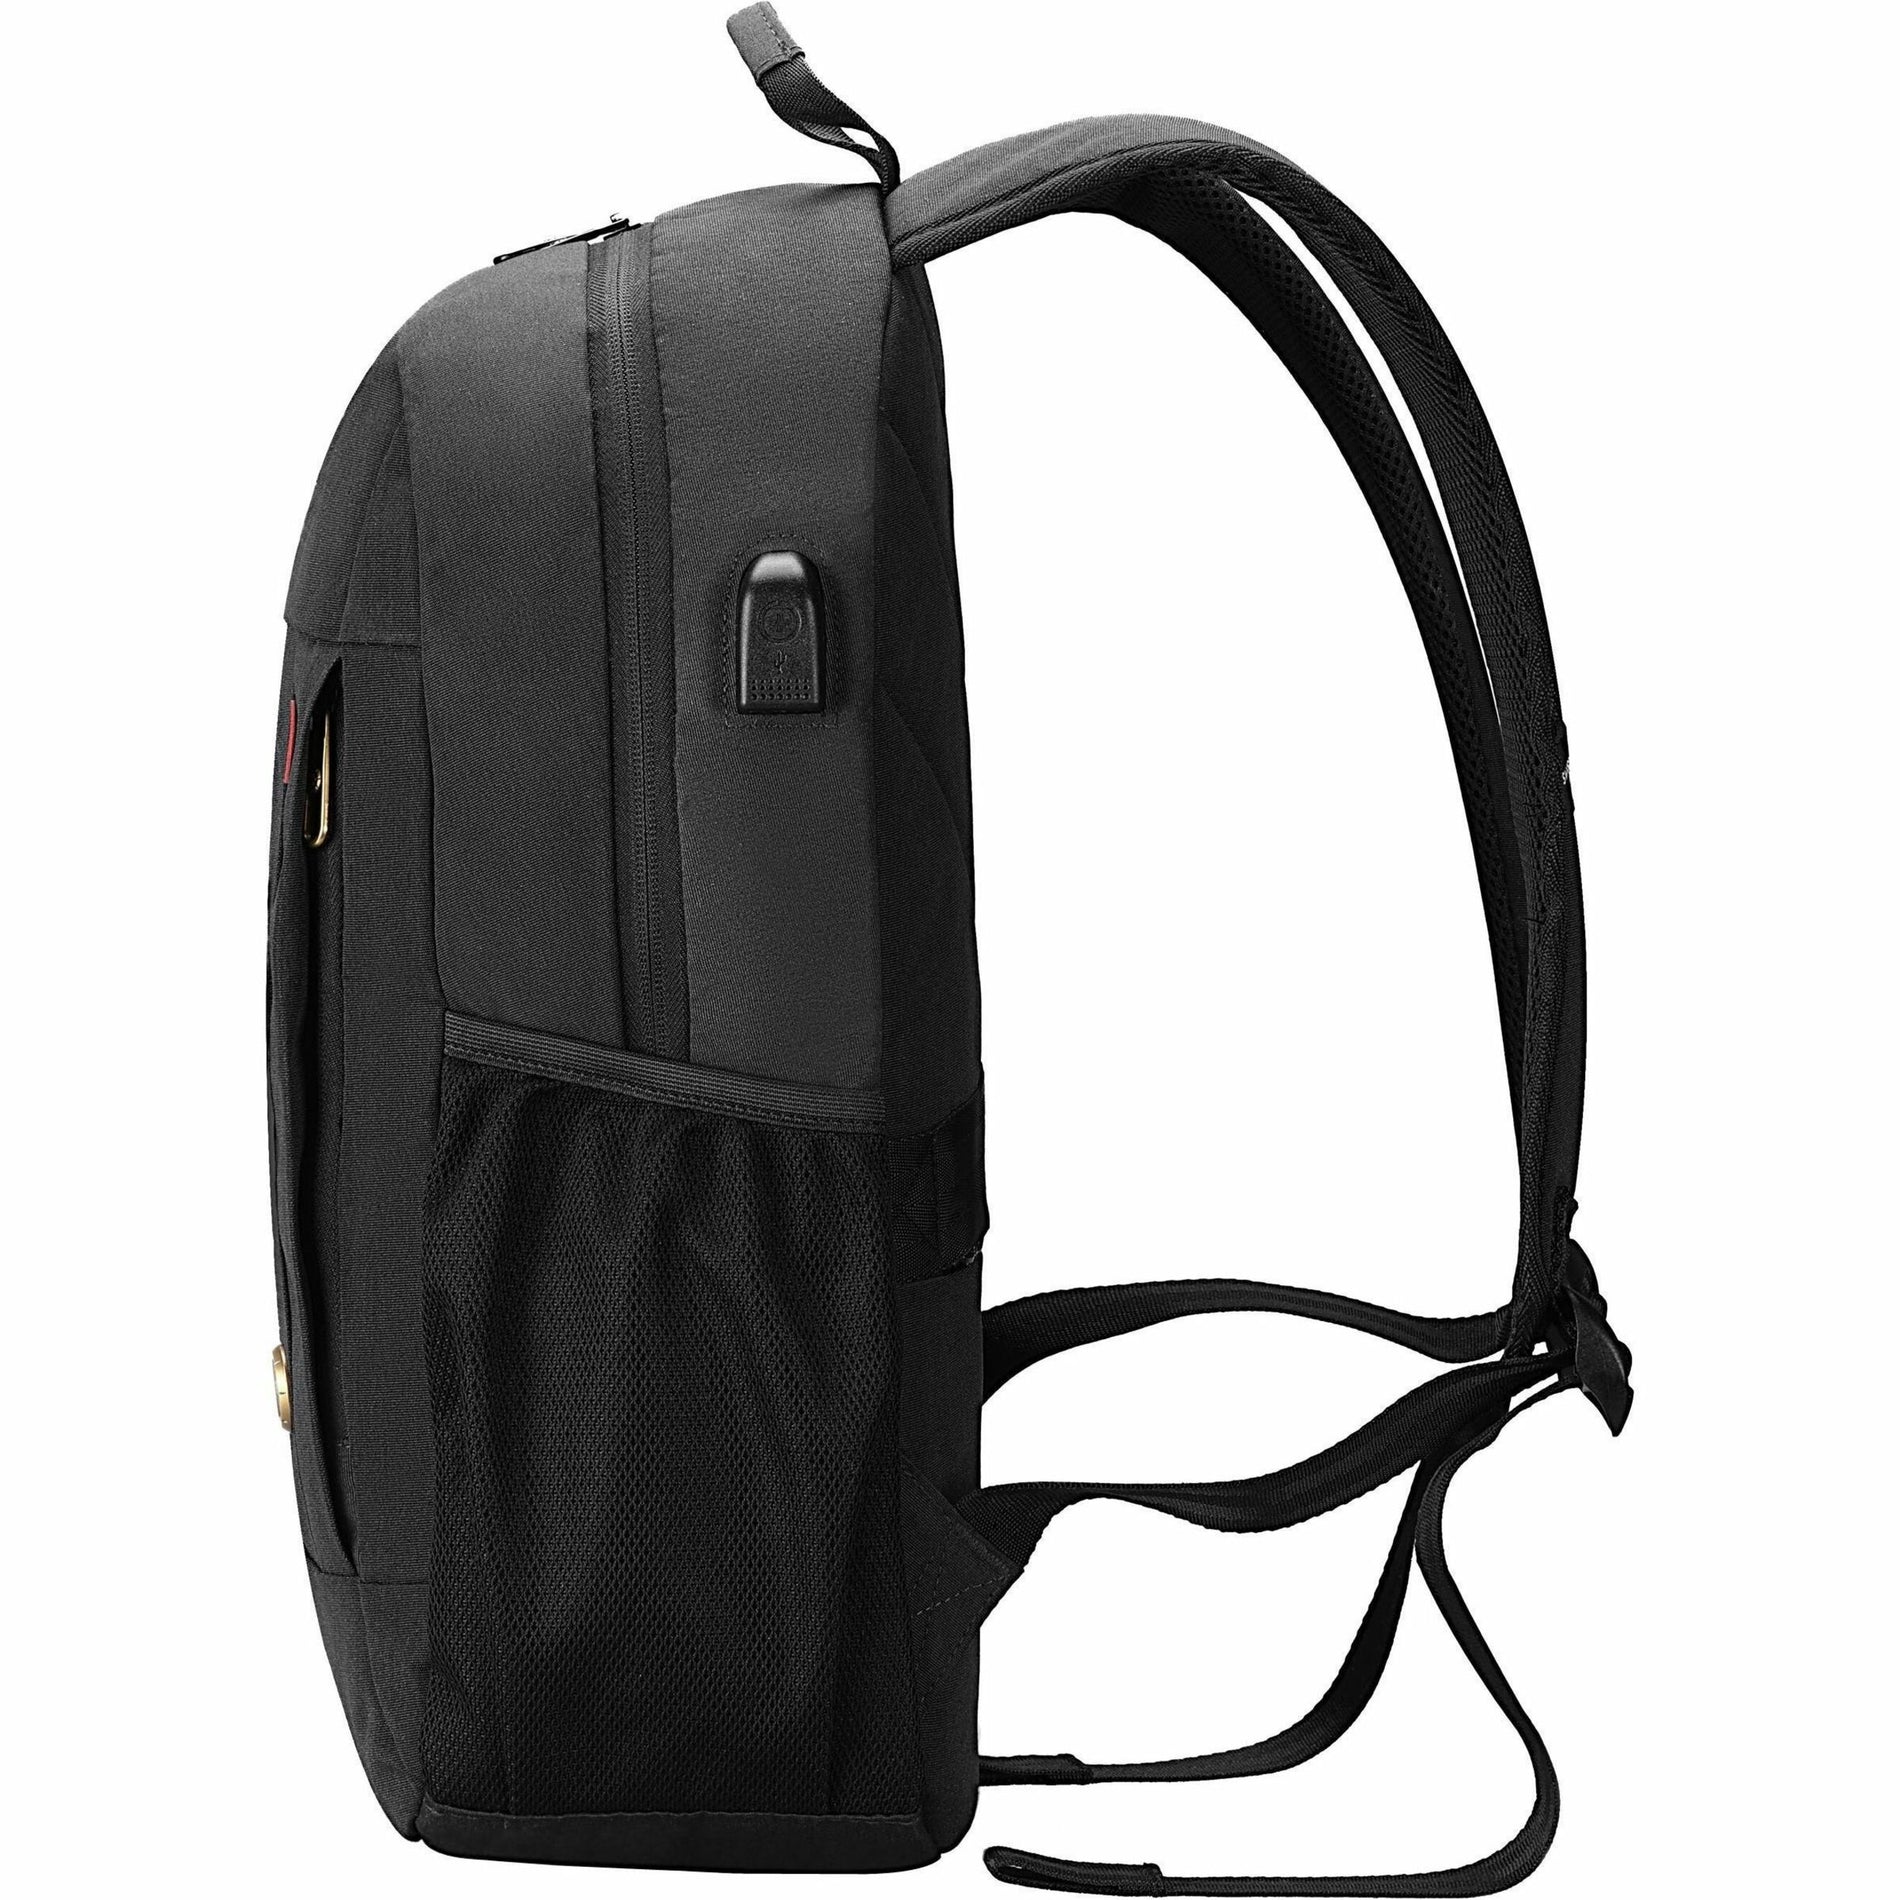 Swissdigital Design SD1634-01 Notebook Case, Backpack Carrying Case, 4.50 gal Volume Capacity, 16" Laptop Compartment, RFID Resistant, Water Resistant, Black